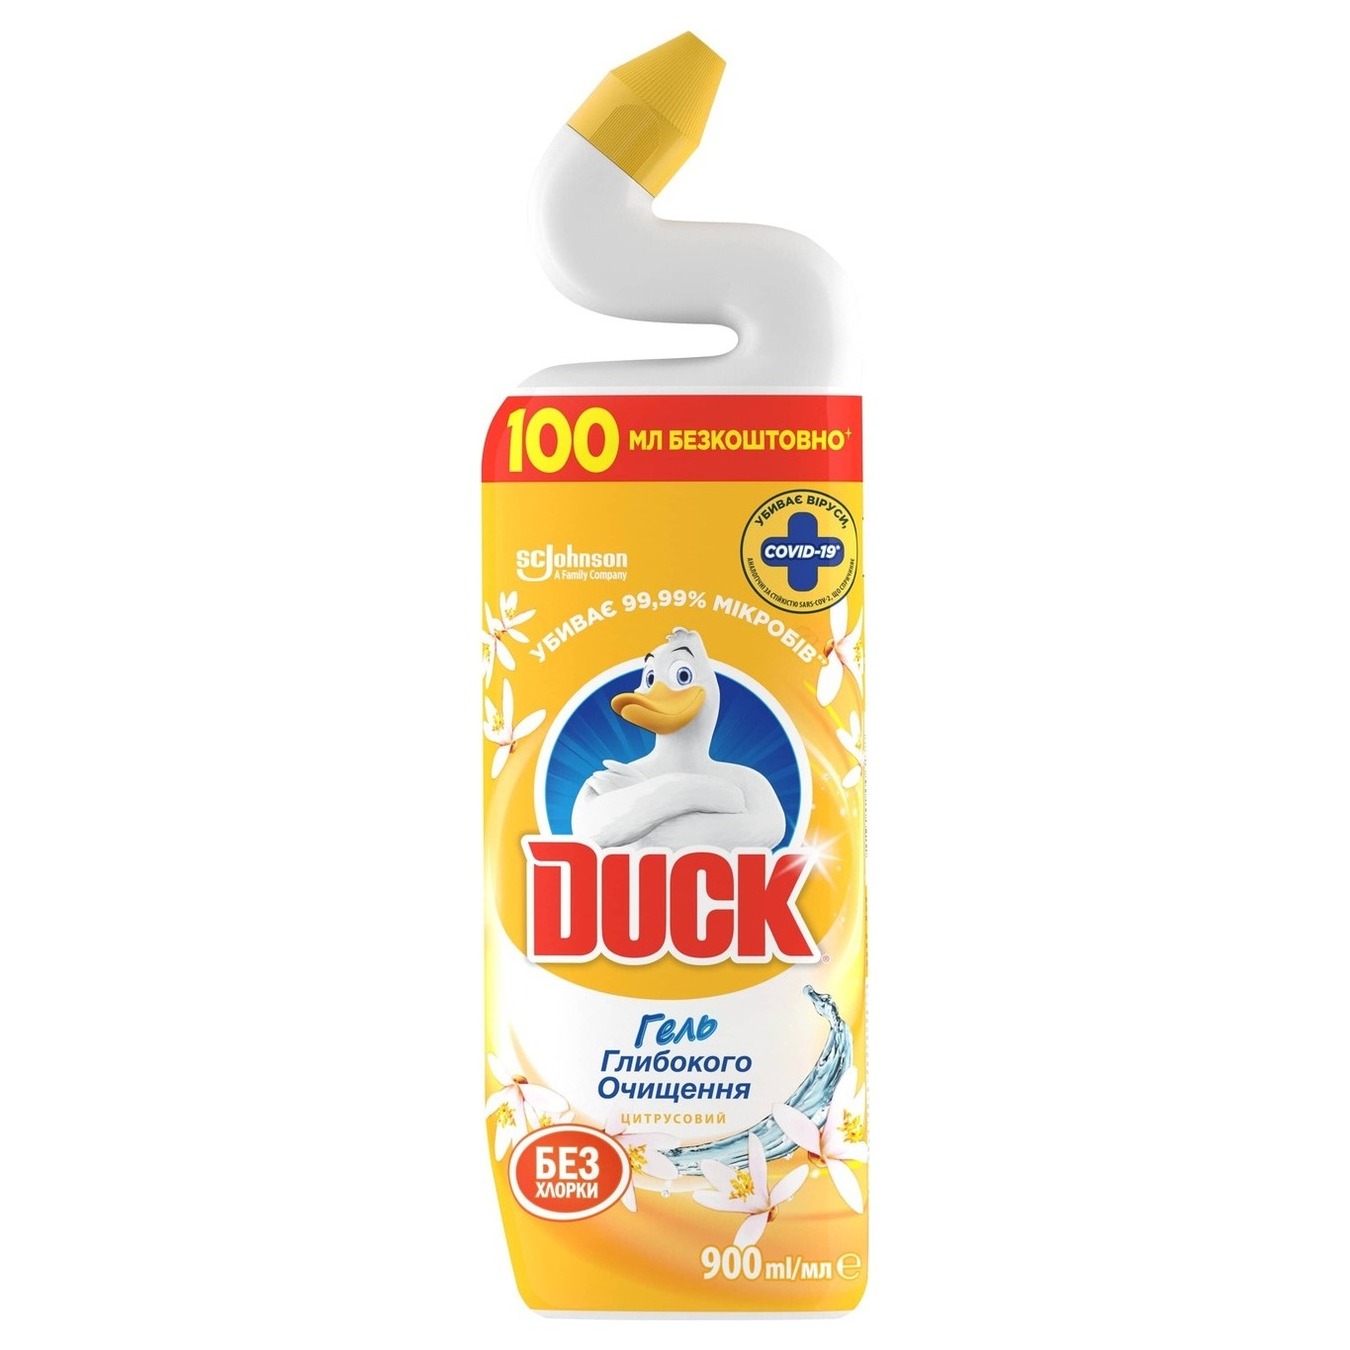 Toilet duck Toilet cleaner Hygiene with citrus aroma 900ml